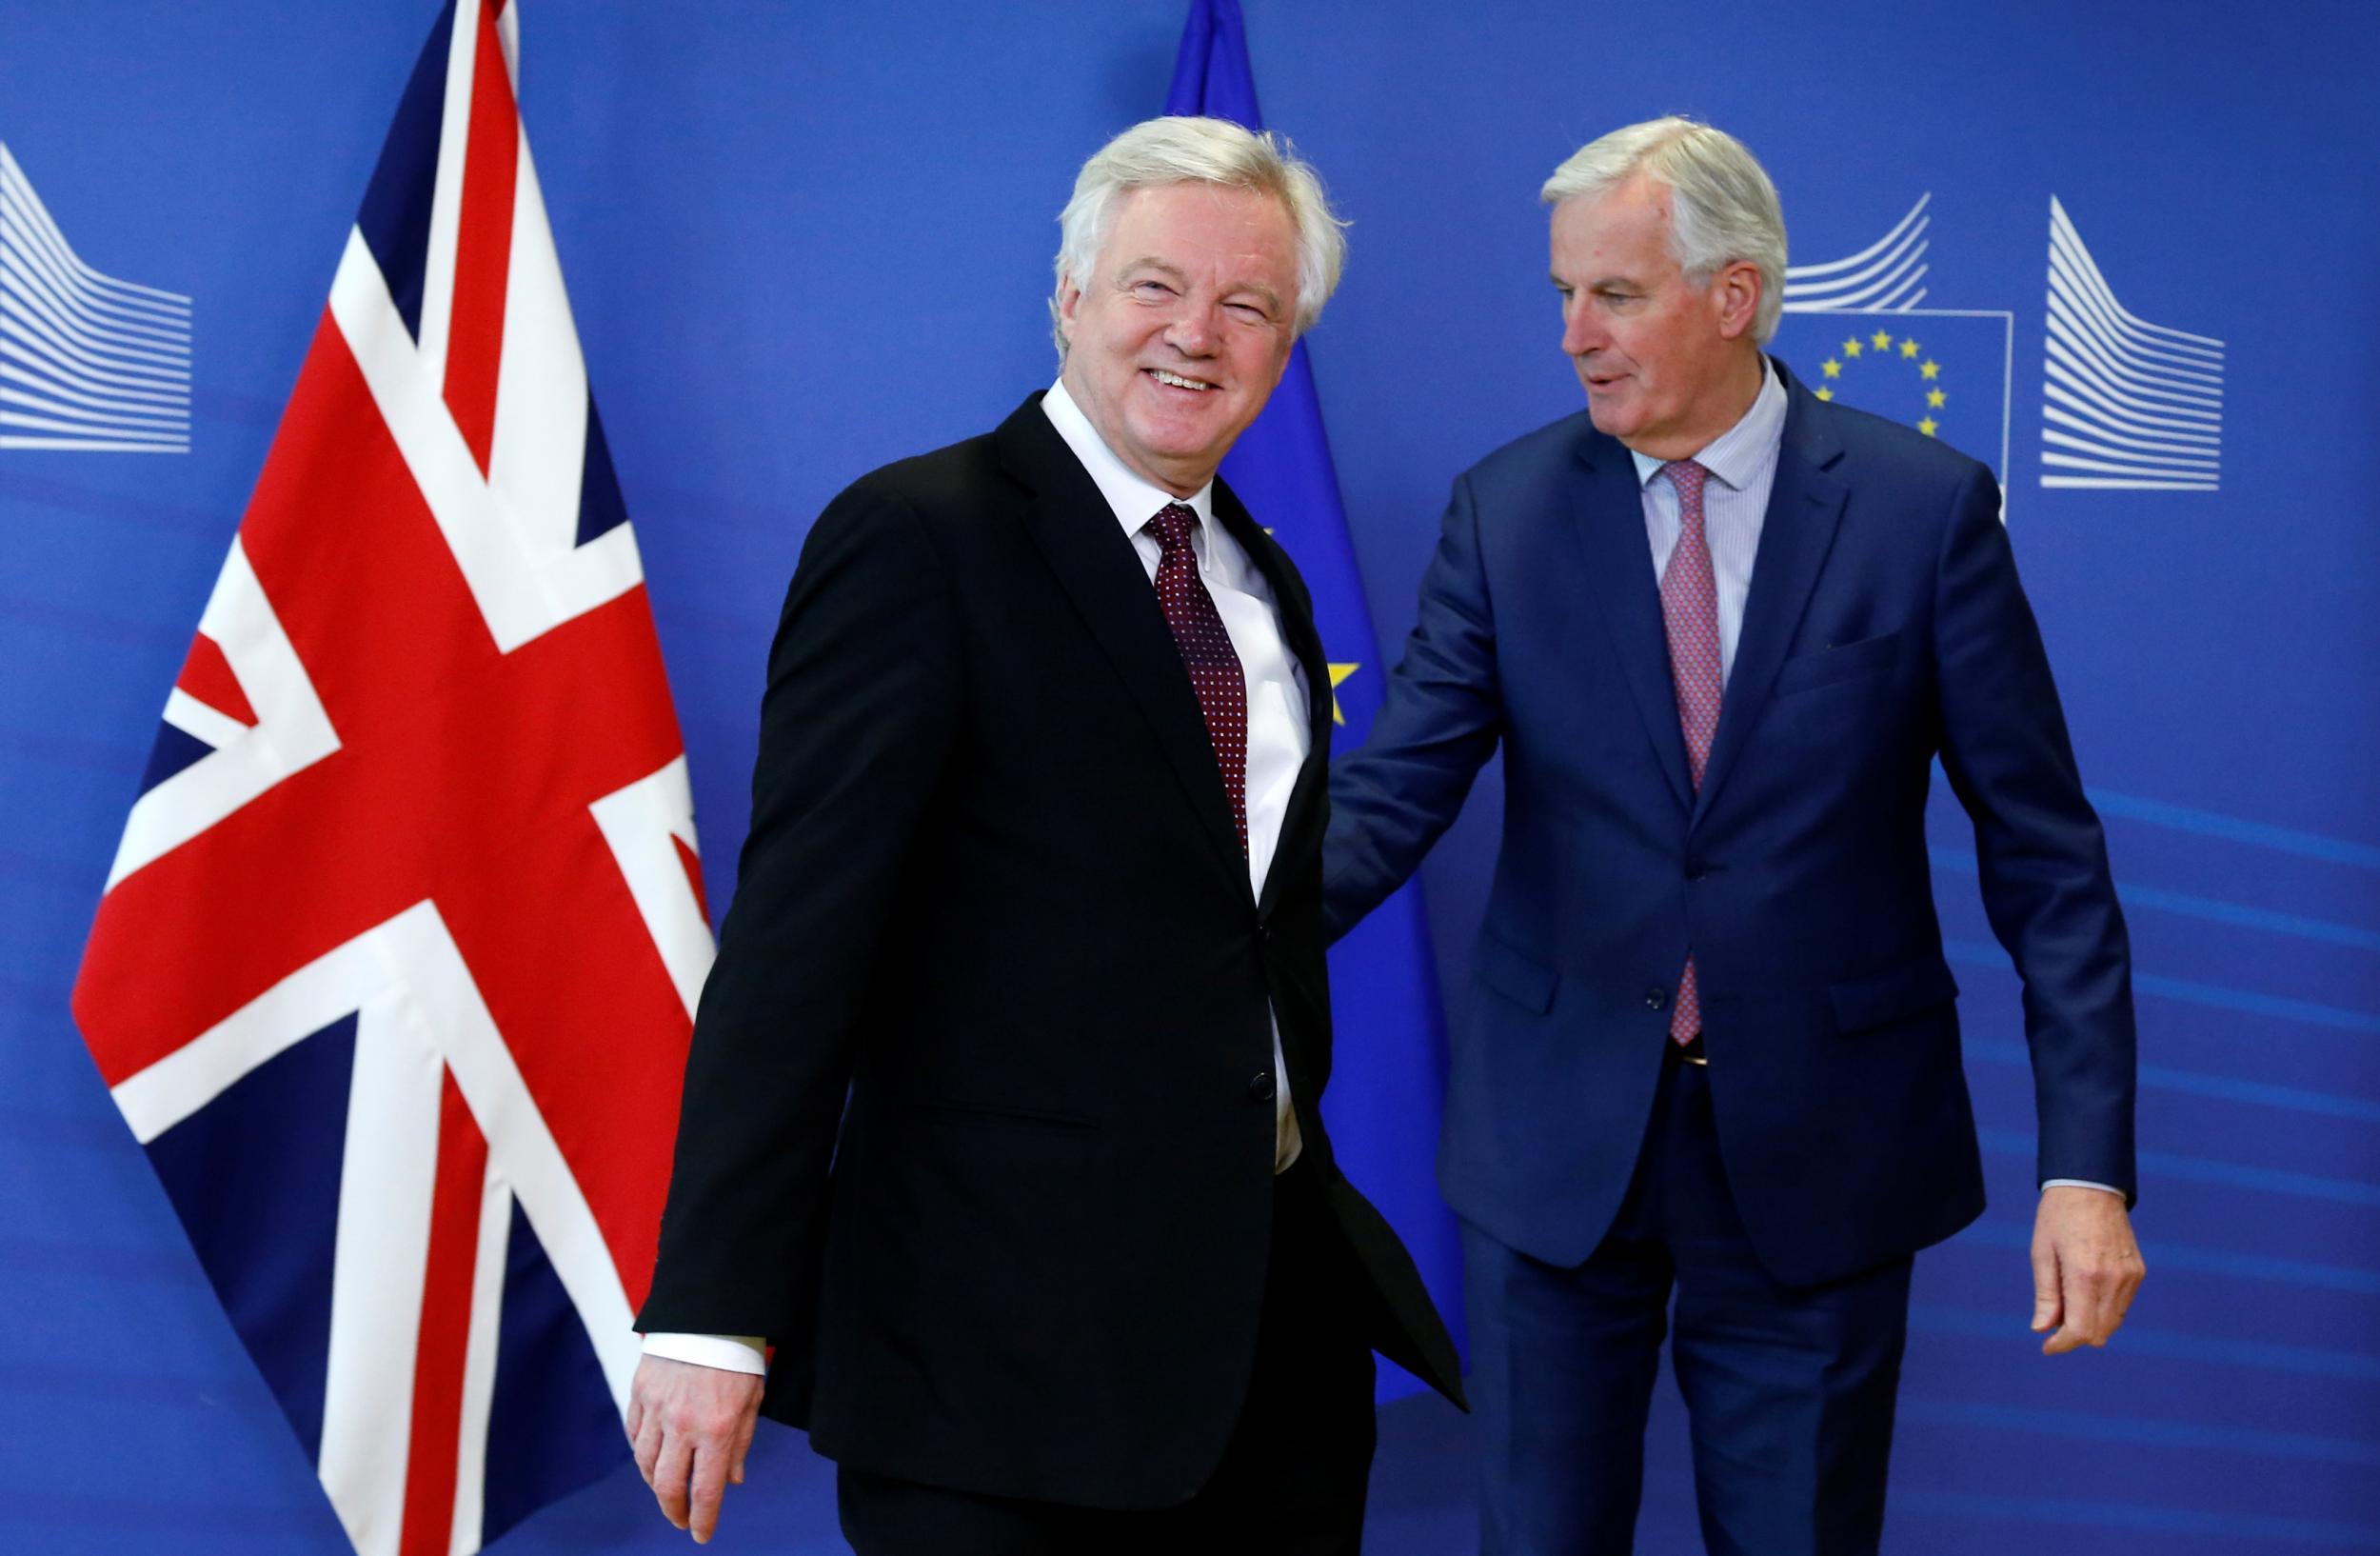 David Davis and Michel Barnier have agreed a deal on the transition period